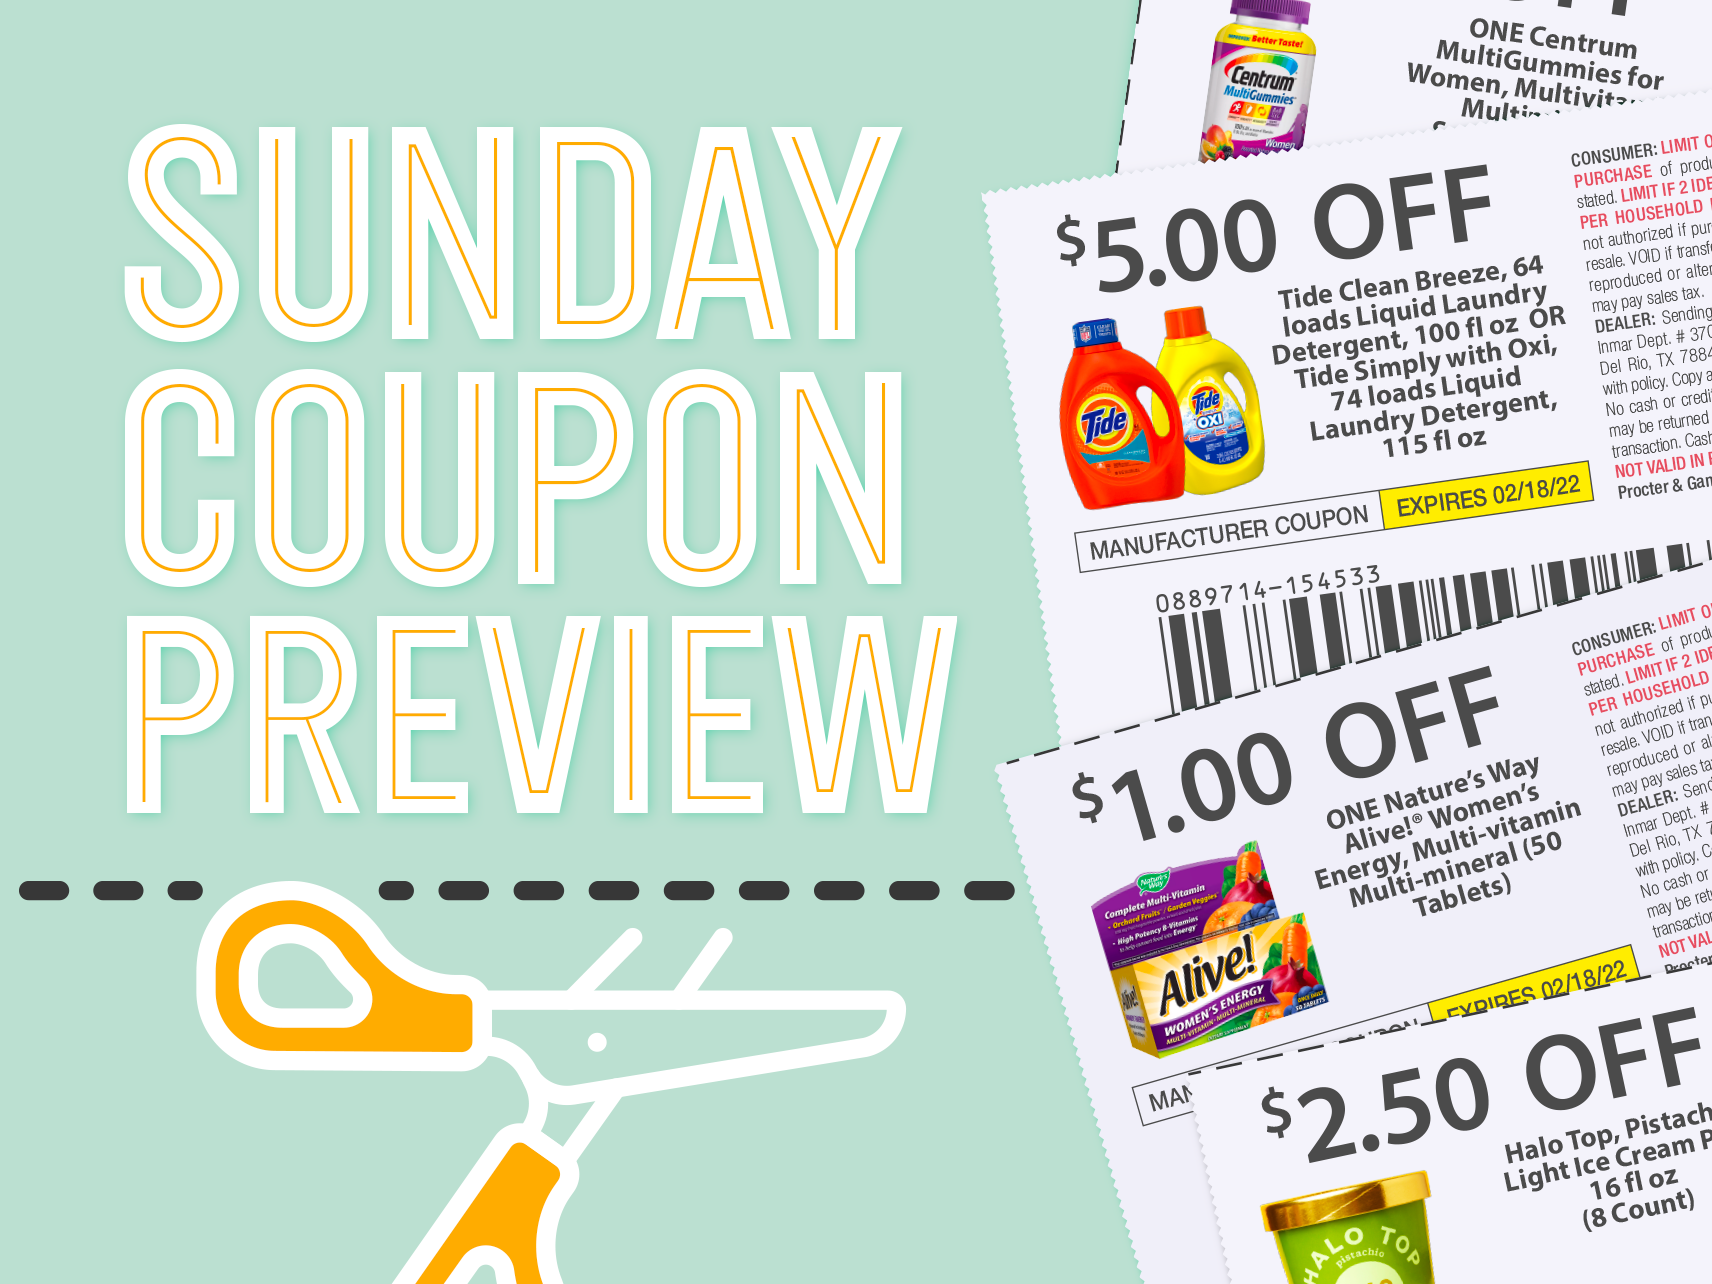 Sunday Coupon Preview For 8/7 – Three Inserts